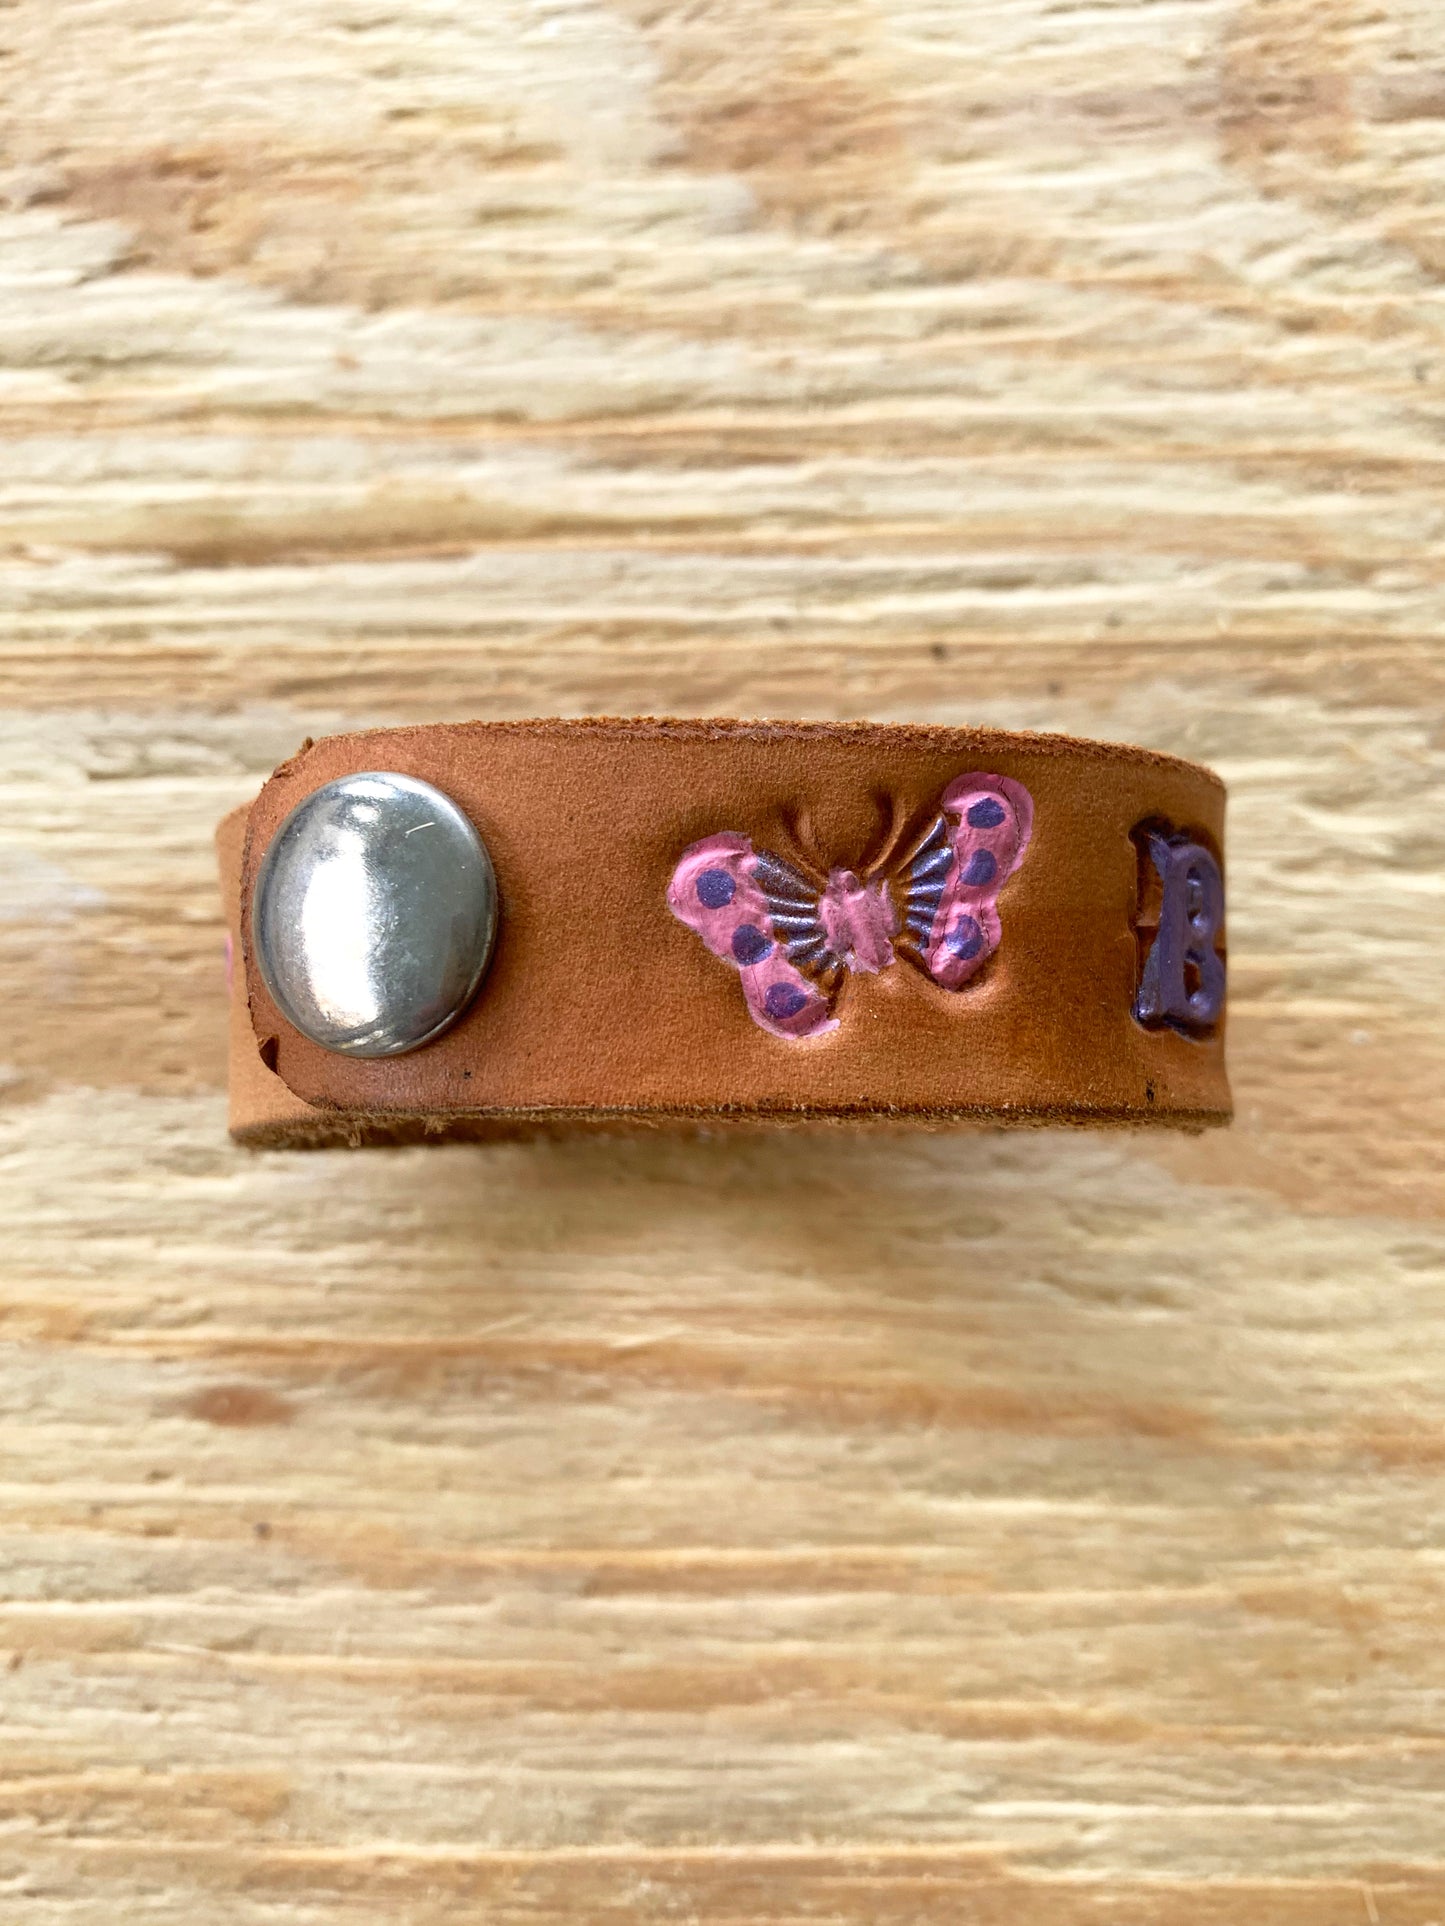 Personalized Leather Name Bracelet